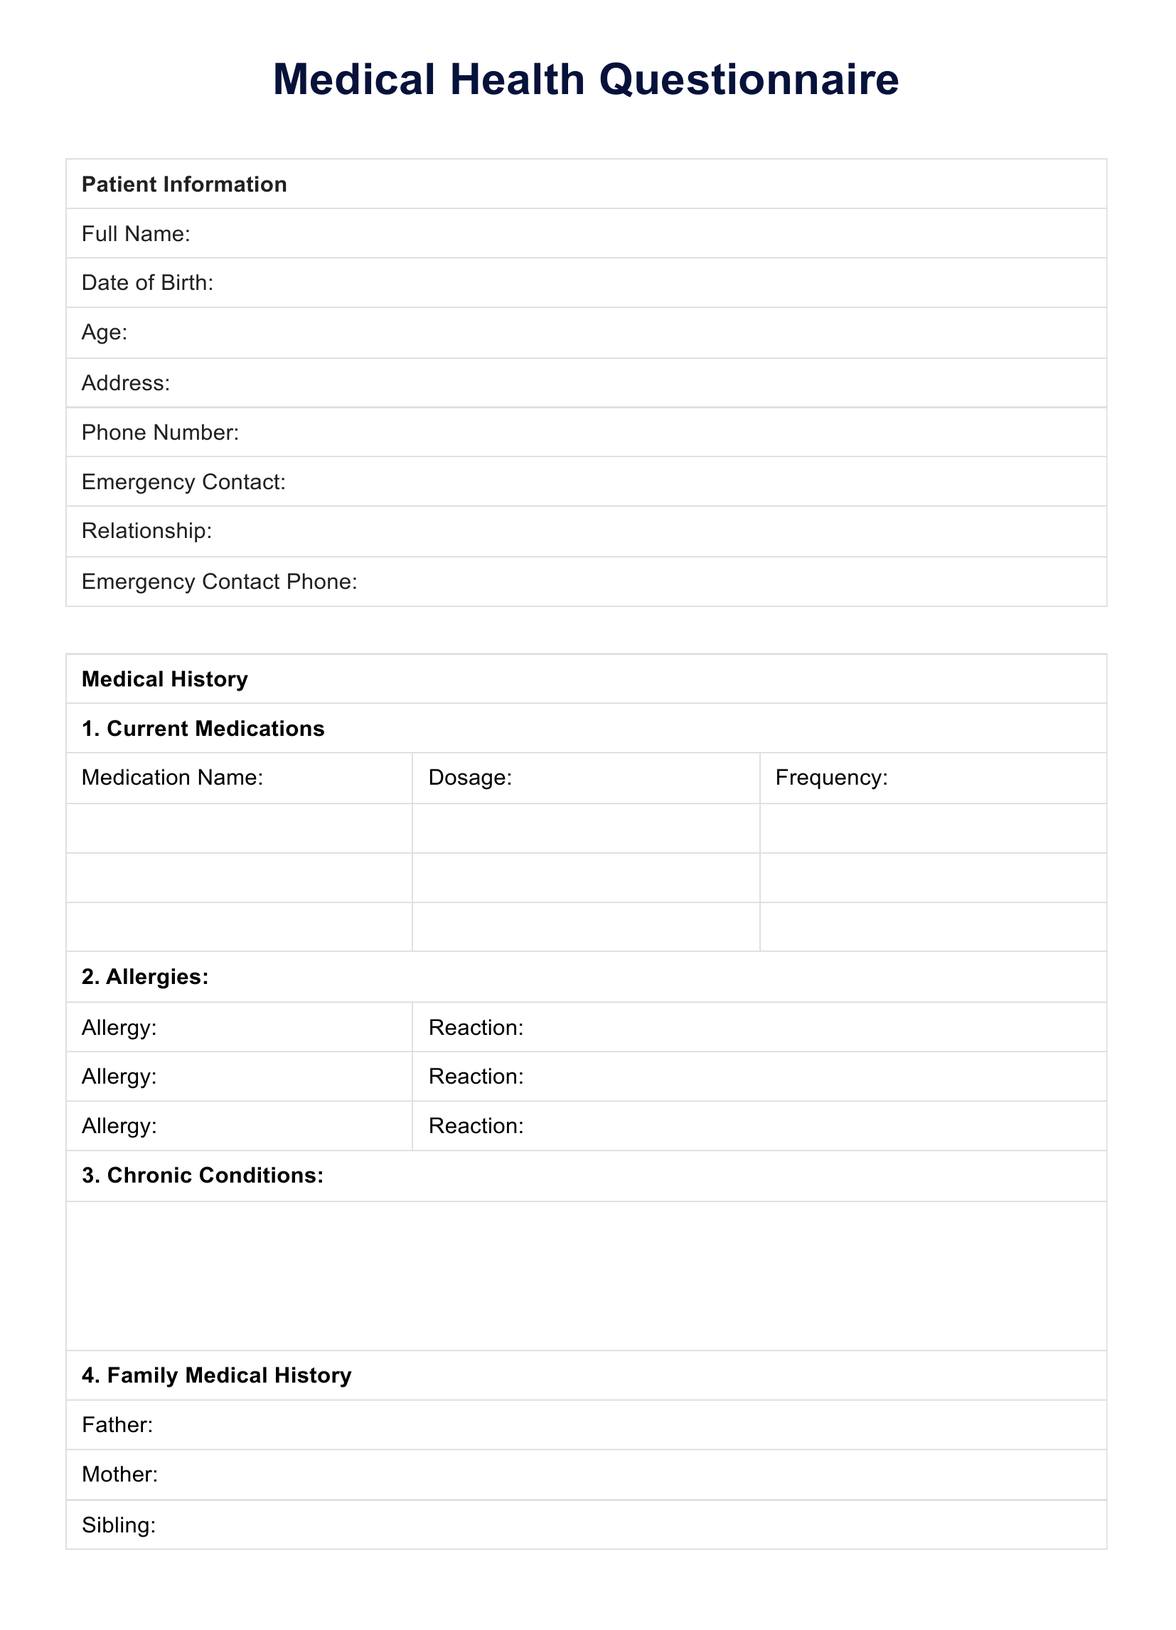 Medical Health Questionnaire PDF Example